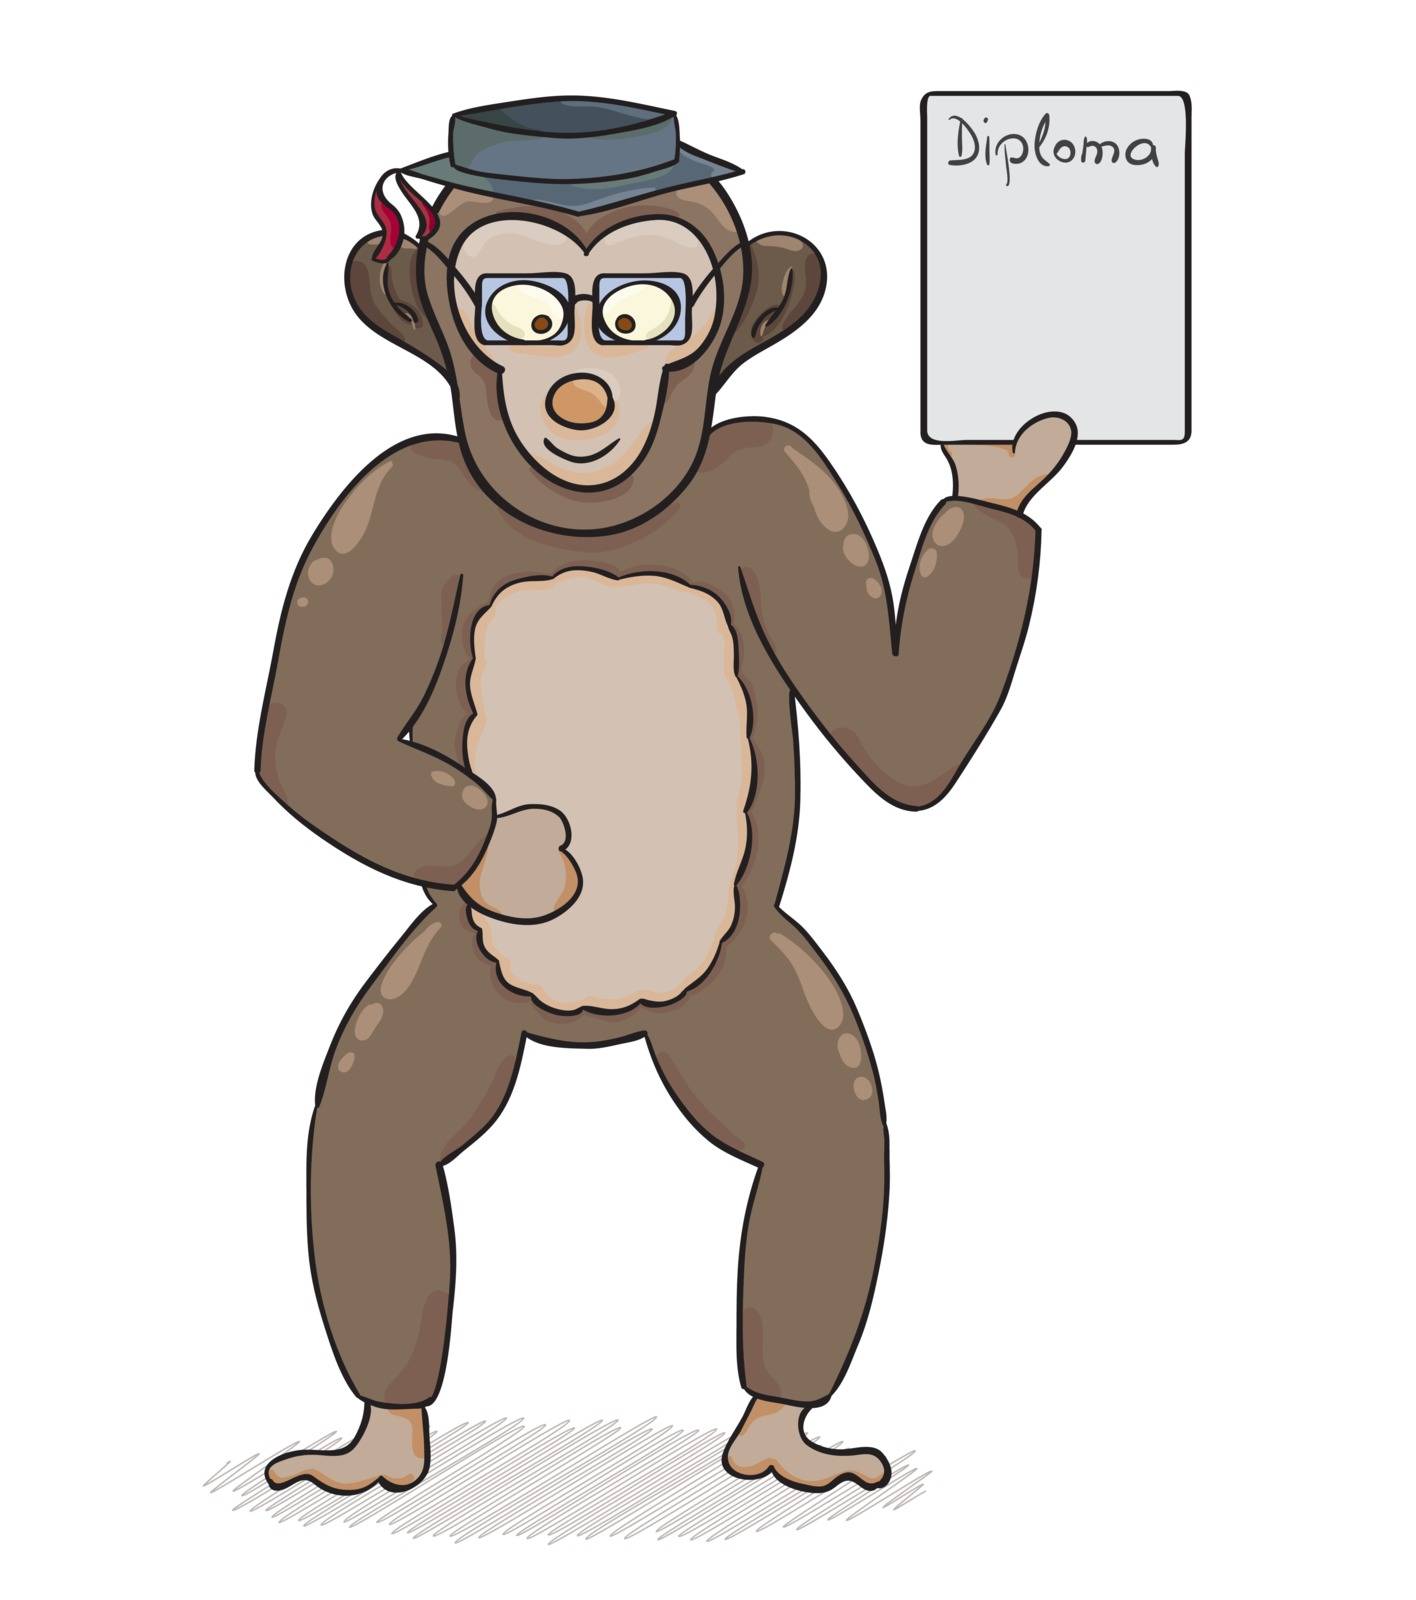 clever monkey with diploma by muuraa